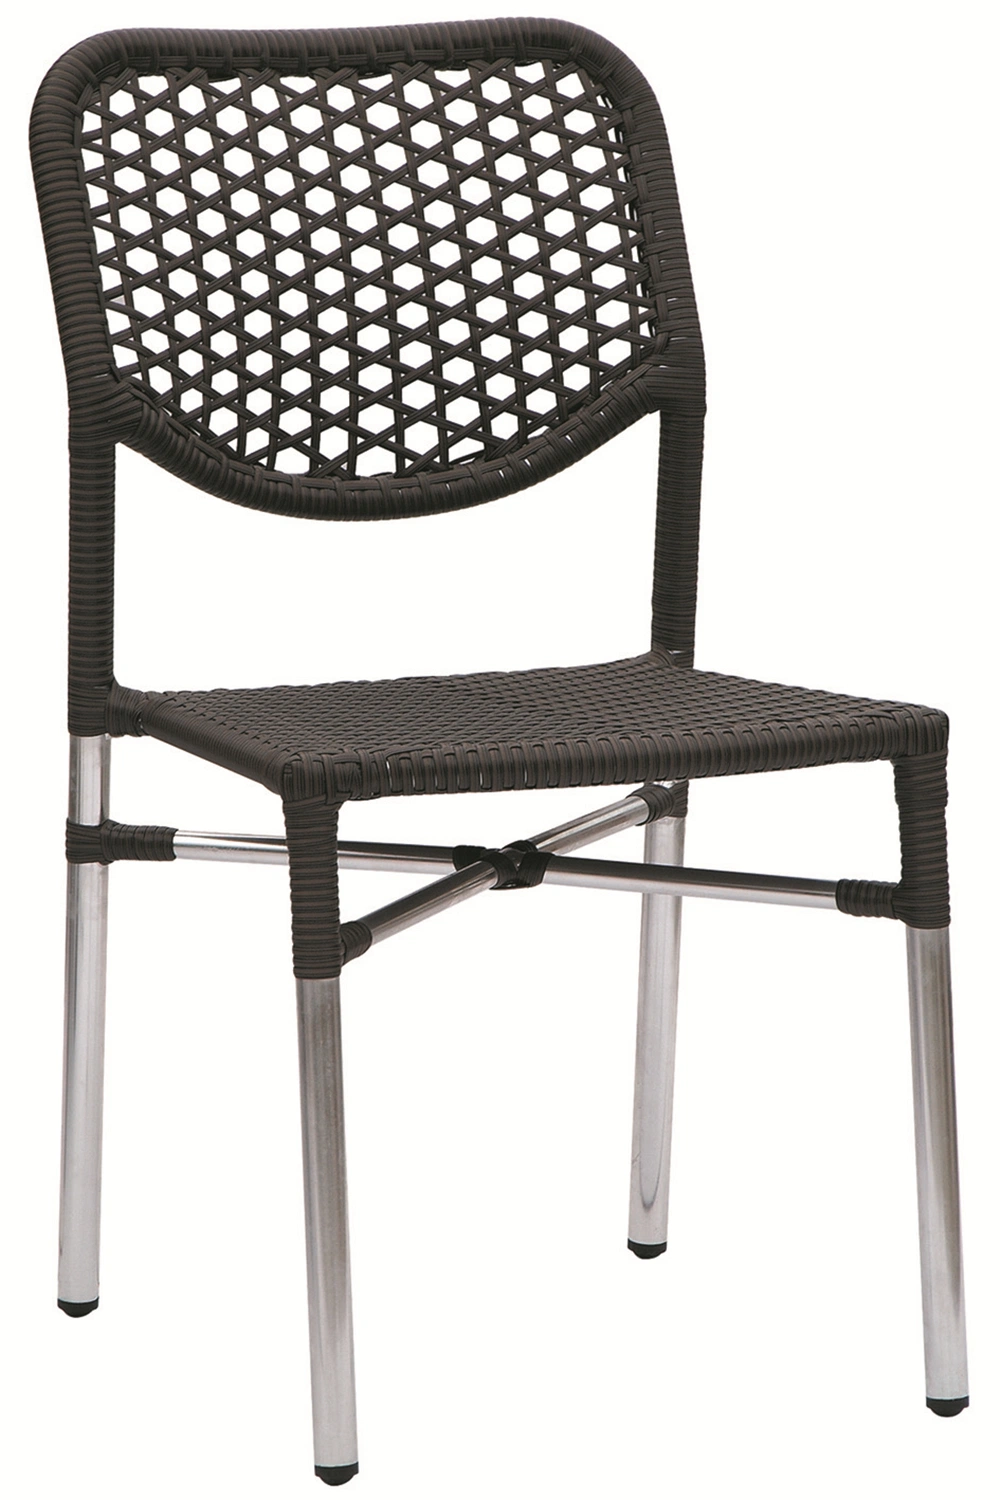 Round Rattan Normal Weaving Shiny Frame Stackable Restaurant Catering Chair